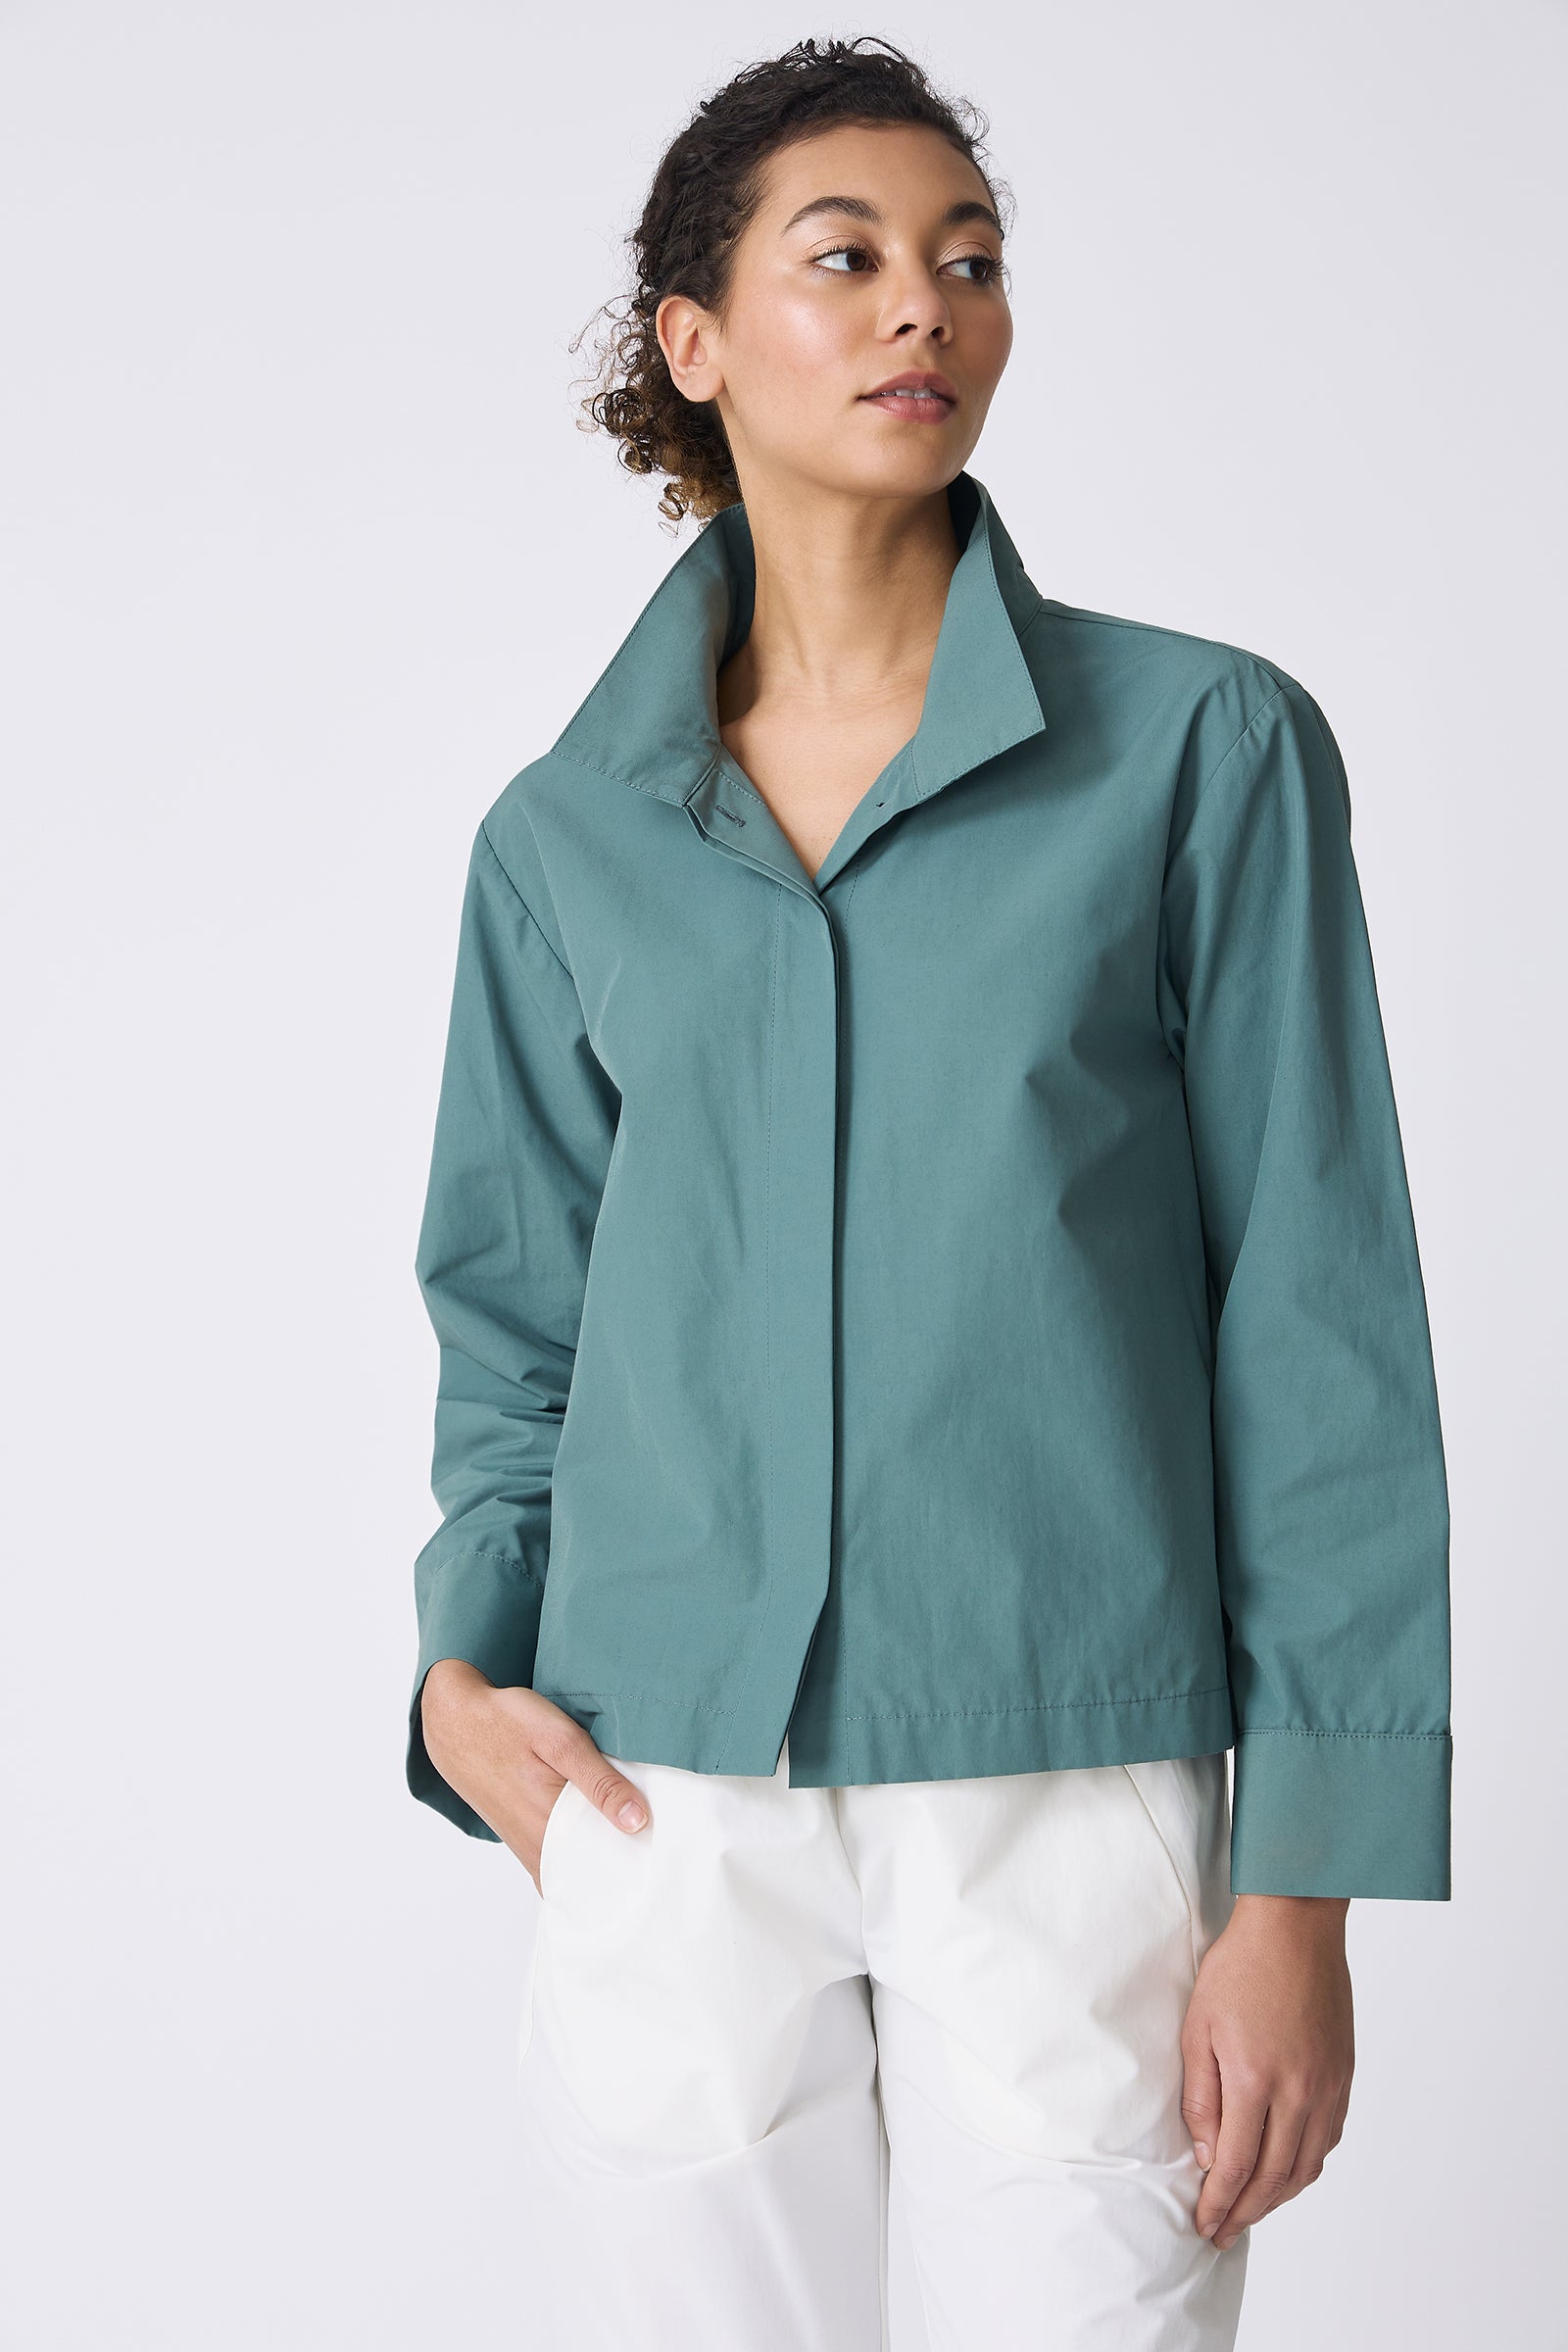 Kal Rieman Peggy Collared Shirt in Sage on model looking left front view